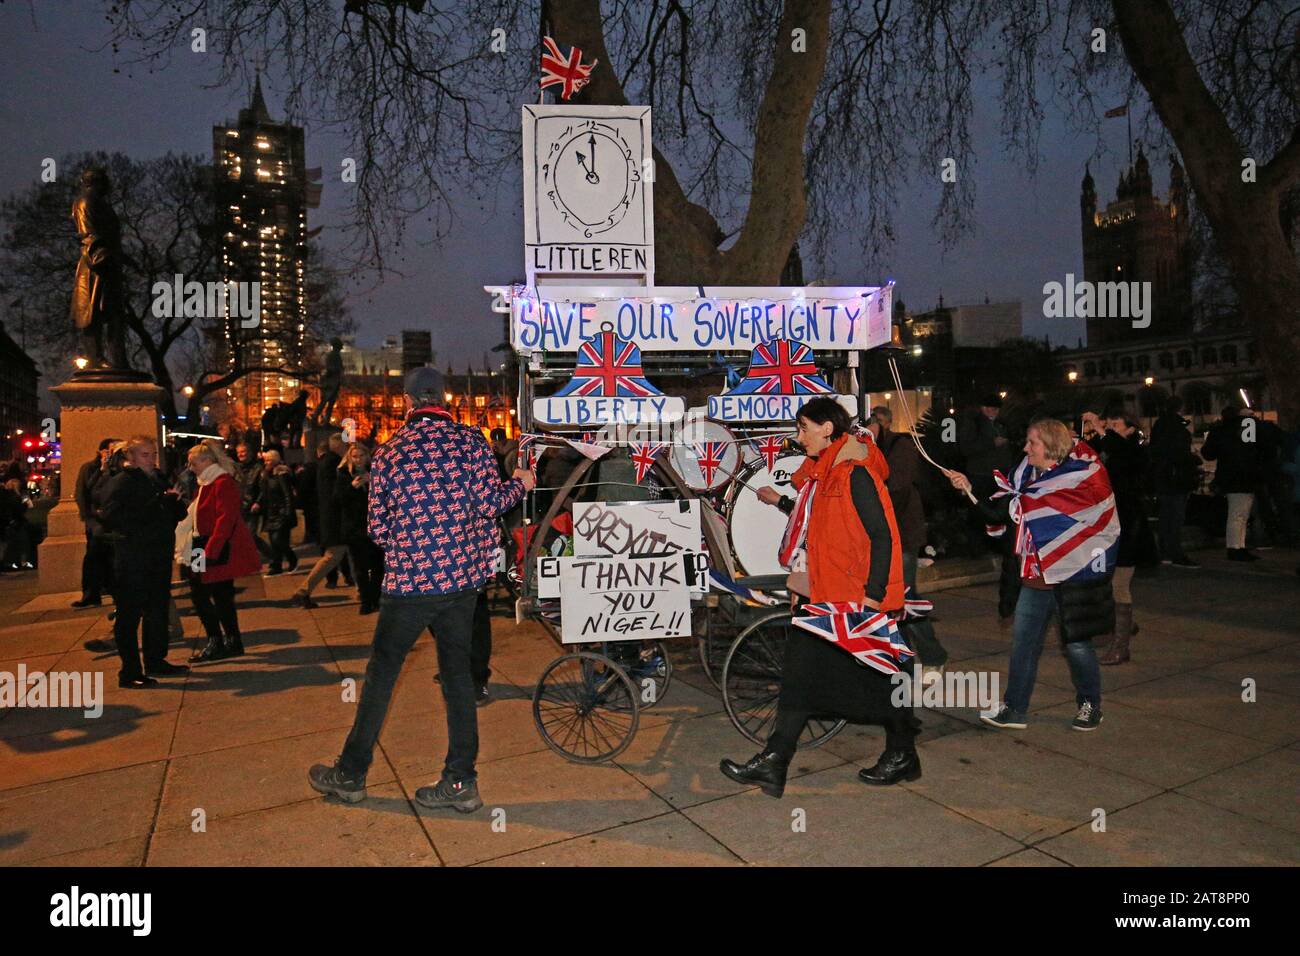 Pro-EU supporters in Parliament Square, London, ahead of the UK leaving the European Union at 11pm on Friday. Stock Photo